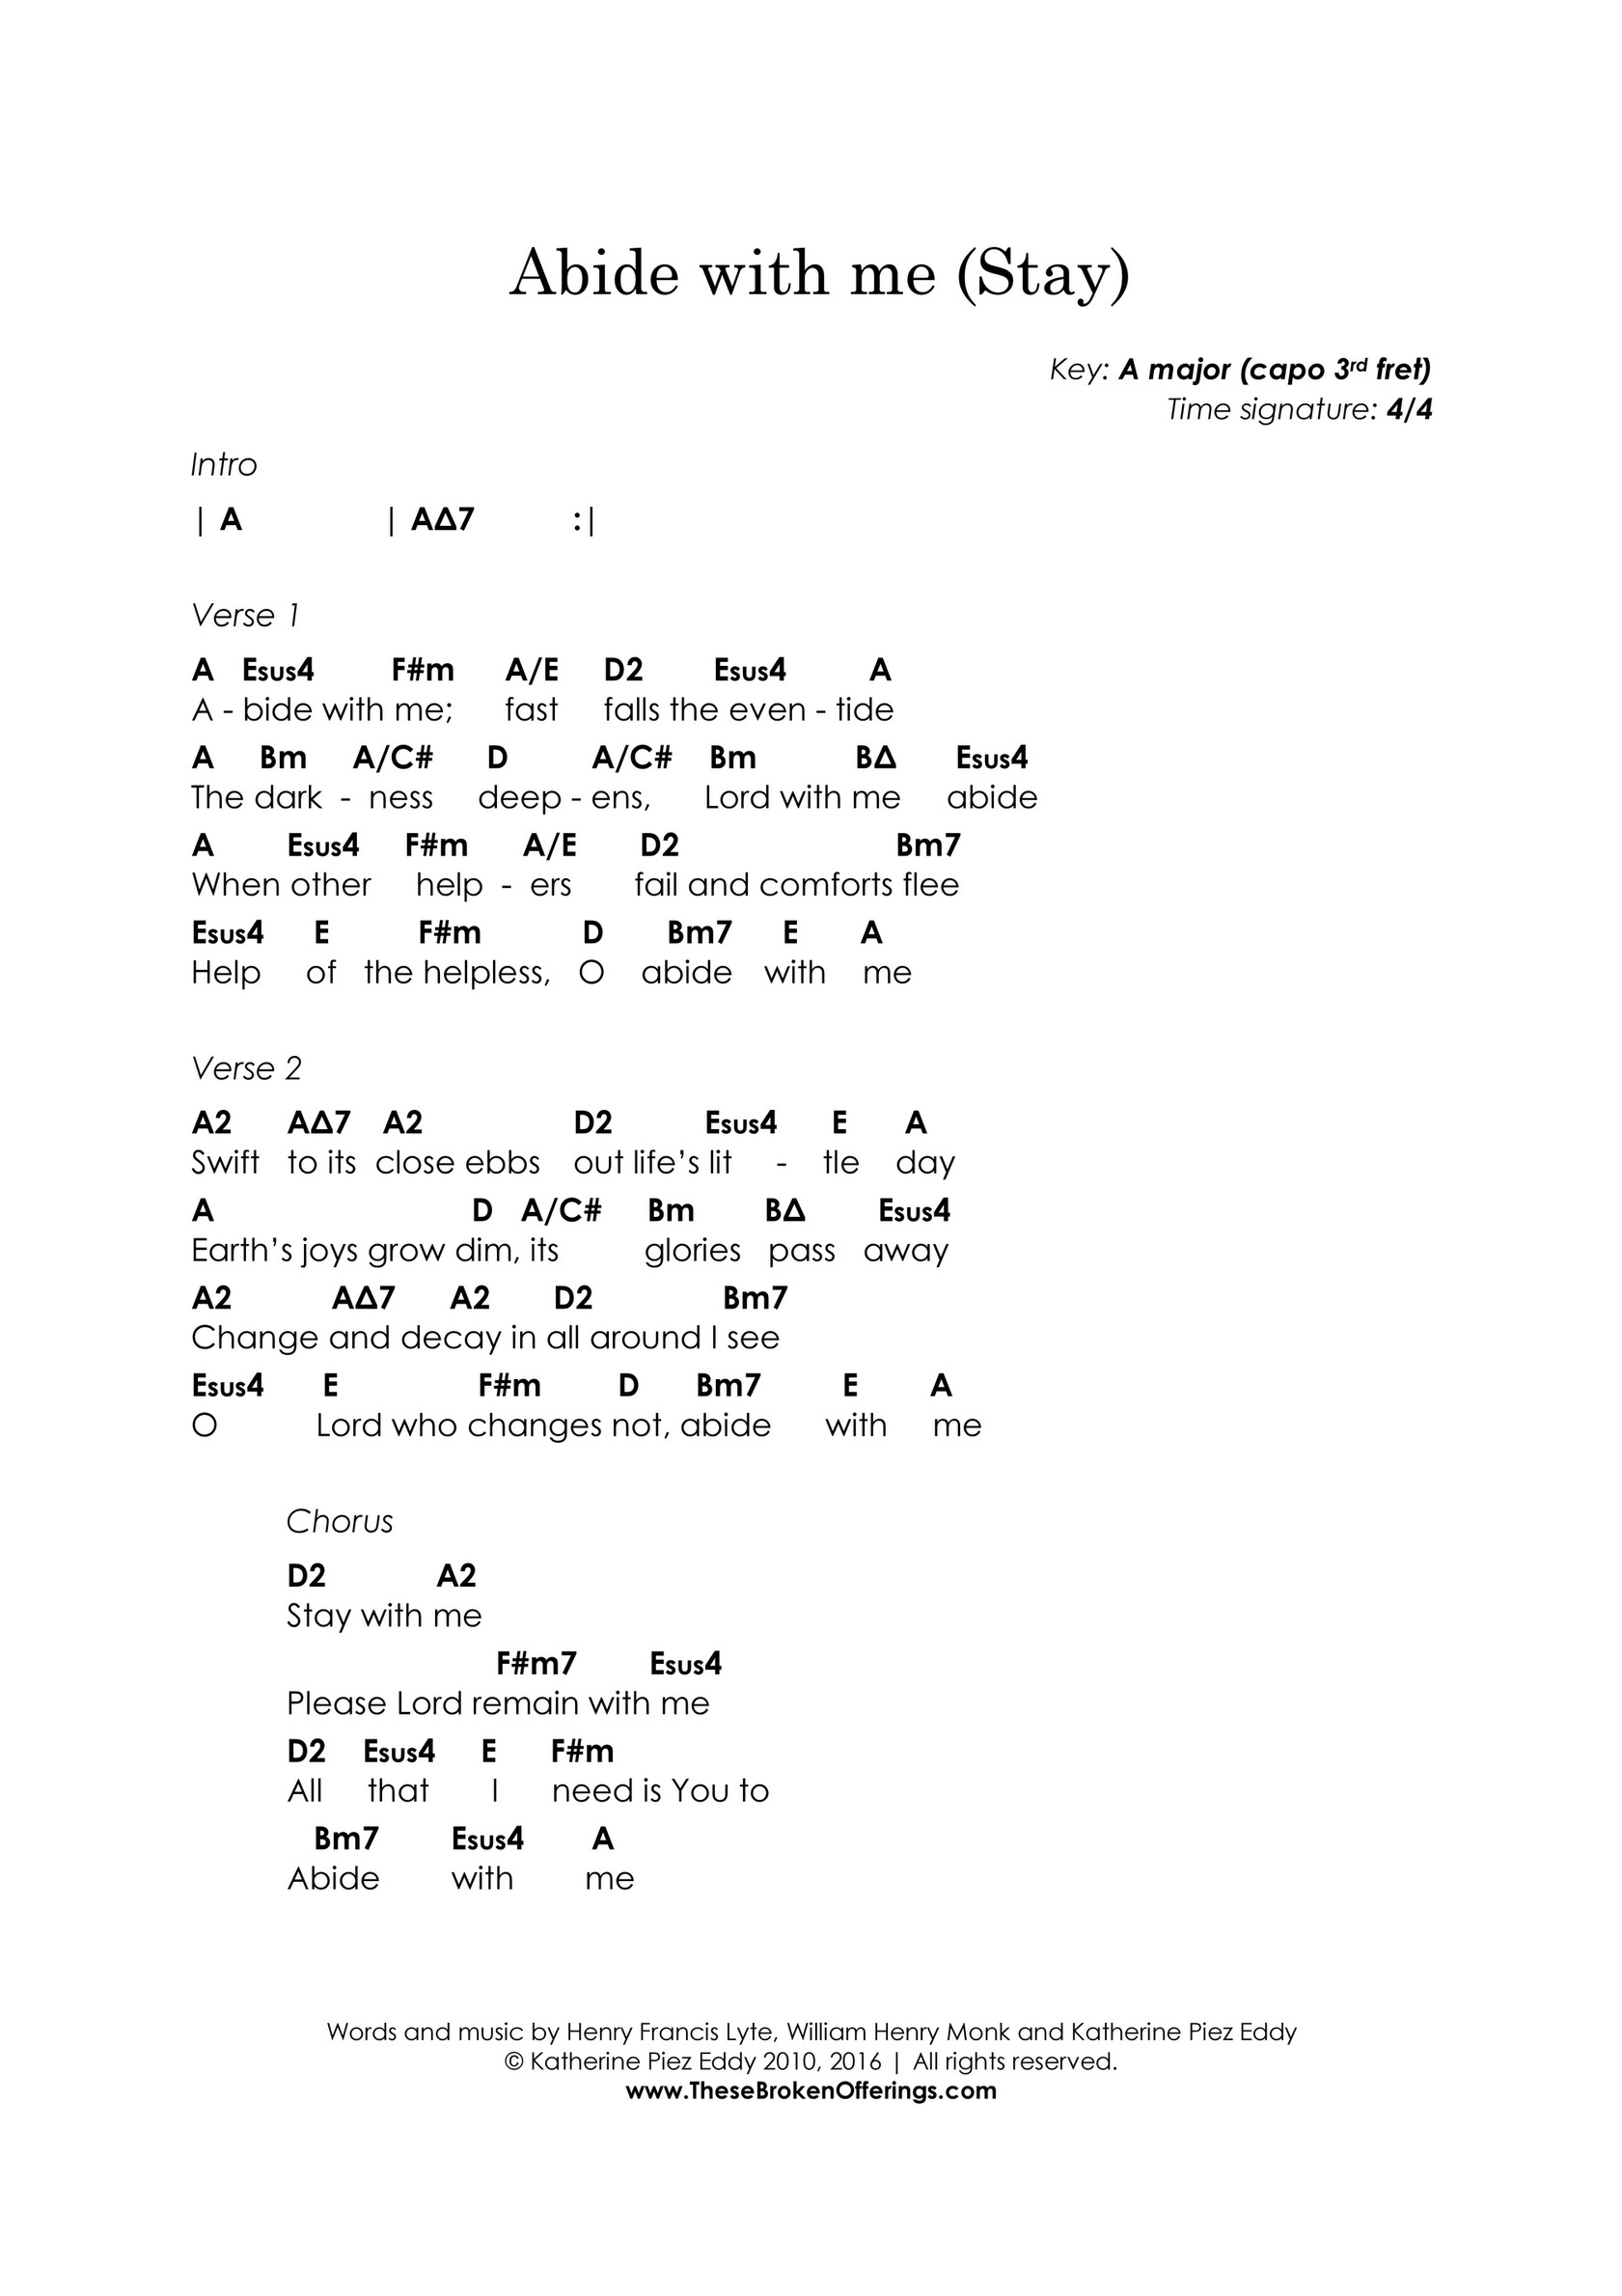 These Broken Offerings - Abide With Me (Stay) - Chord Chart - A - Page 1 -  Created With Publitas.Com